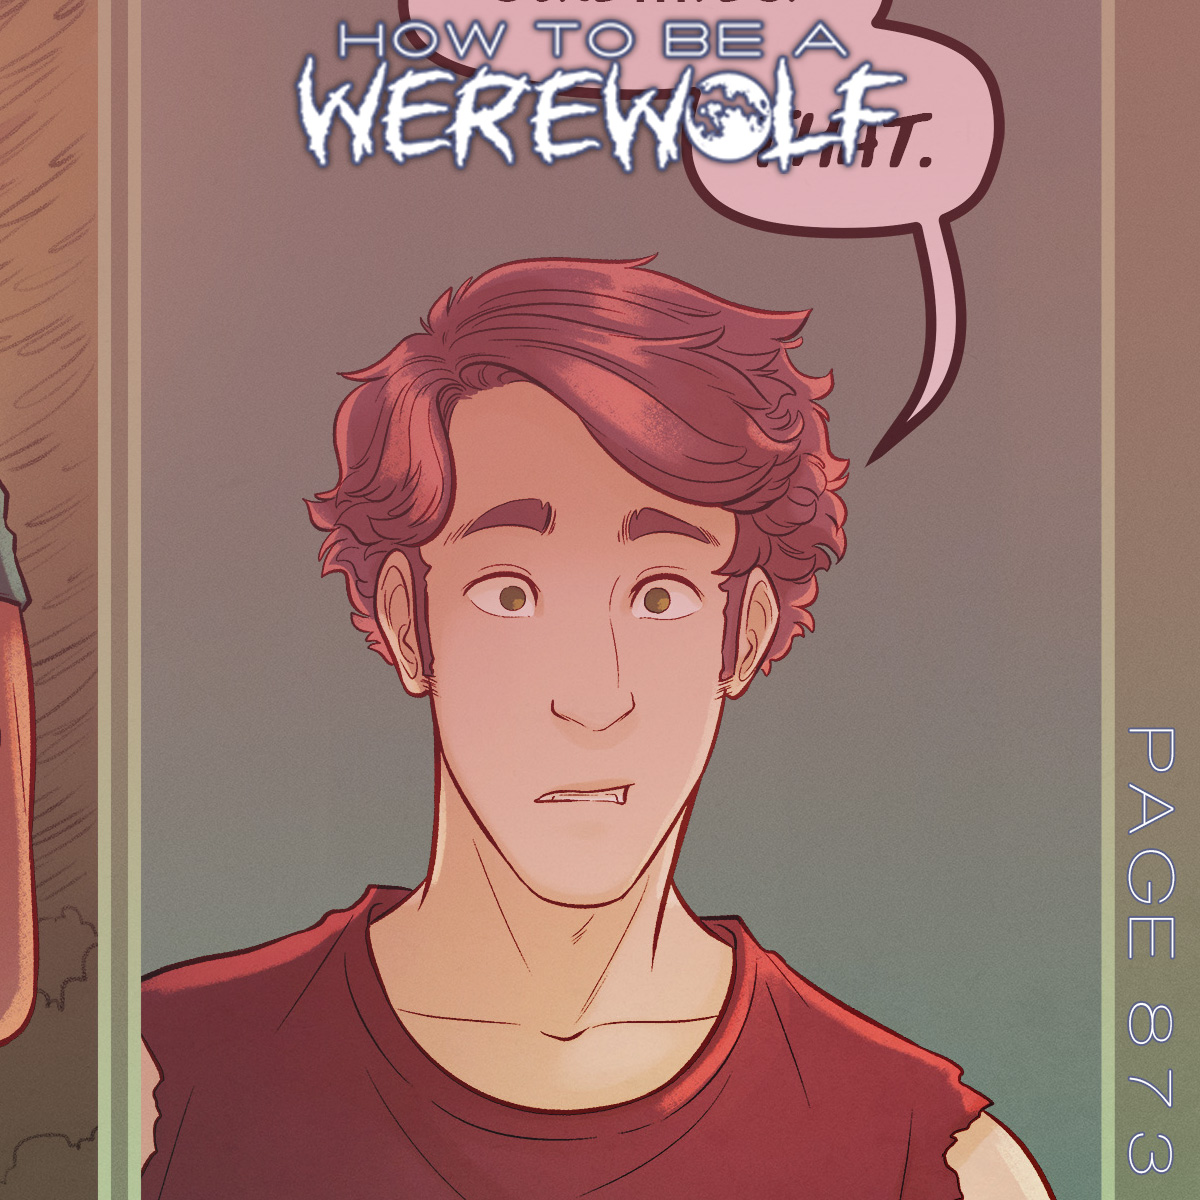 New page! howtobeawerewolf.com You gotta stop being attractive if we're going to get anything done today. #hiveworks